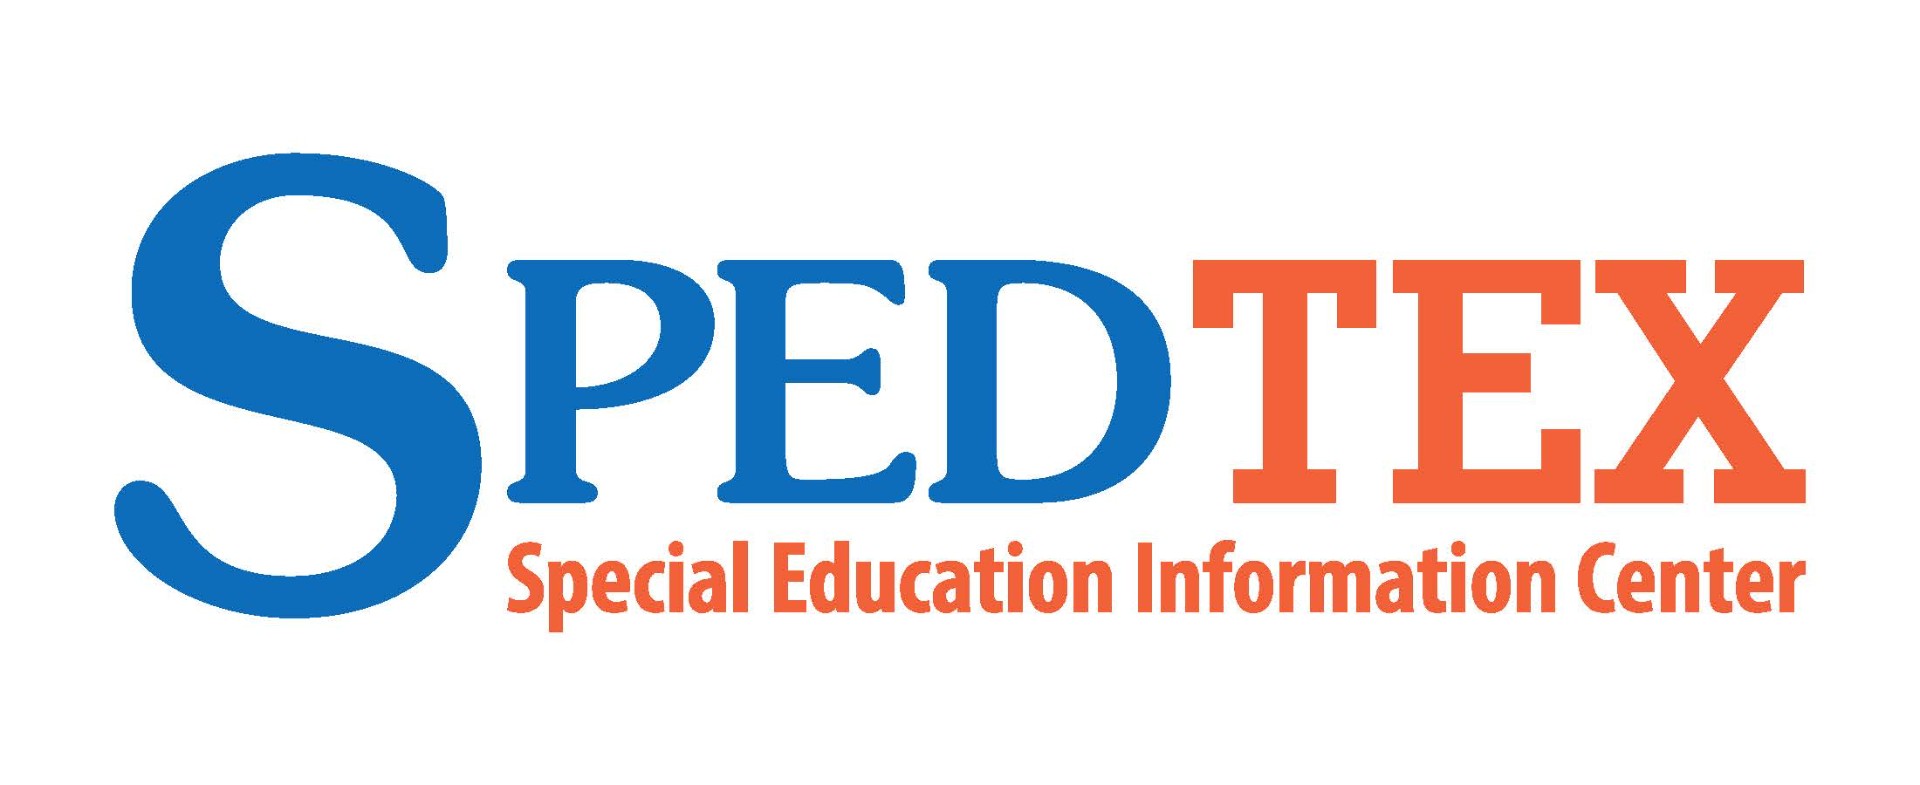 The Special Education Information Center (SPEDTex) provides resources and interactive features for increasing family awareness of disabilities and special education processes, with the goal of improving partnerships between schools and families.  Contact information:  Phone: 1-855-773-3839  Email: inquire@spedtex.org  Live Chat: www.spedtex.org